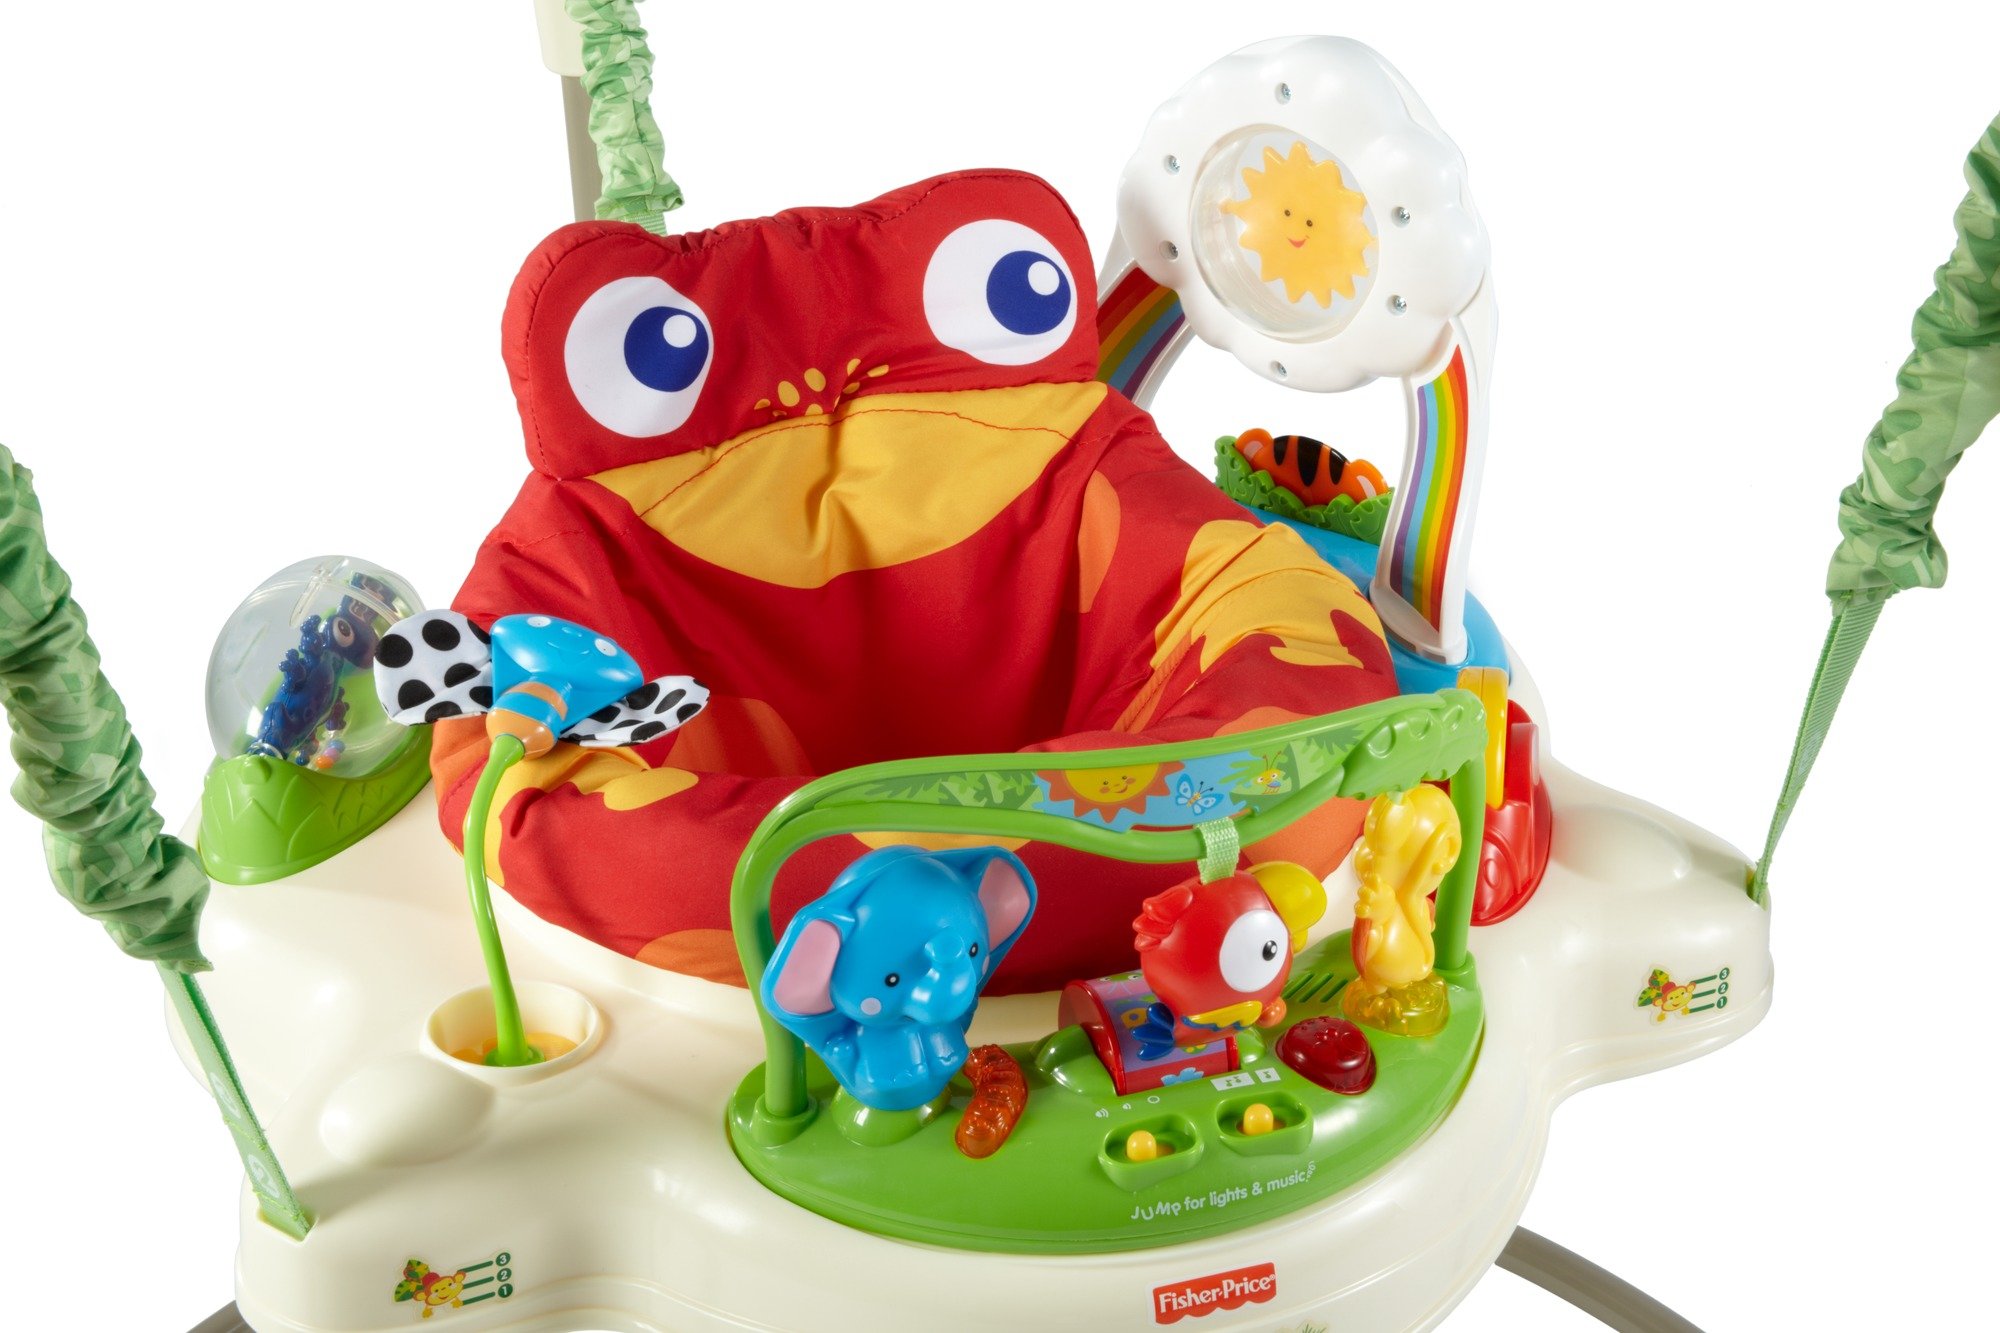 Fisher-Price Baby Bouncer Rainforest Jumperoo Activity Center with Music Lights Sounds and Developmental Toys